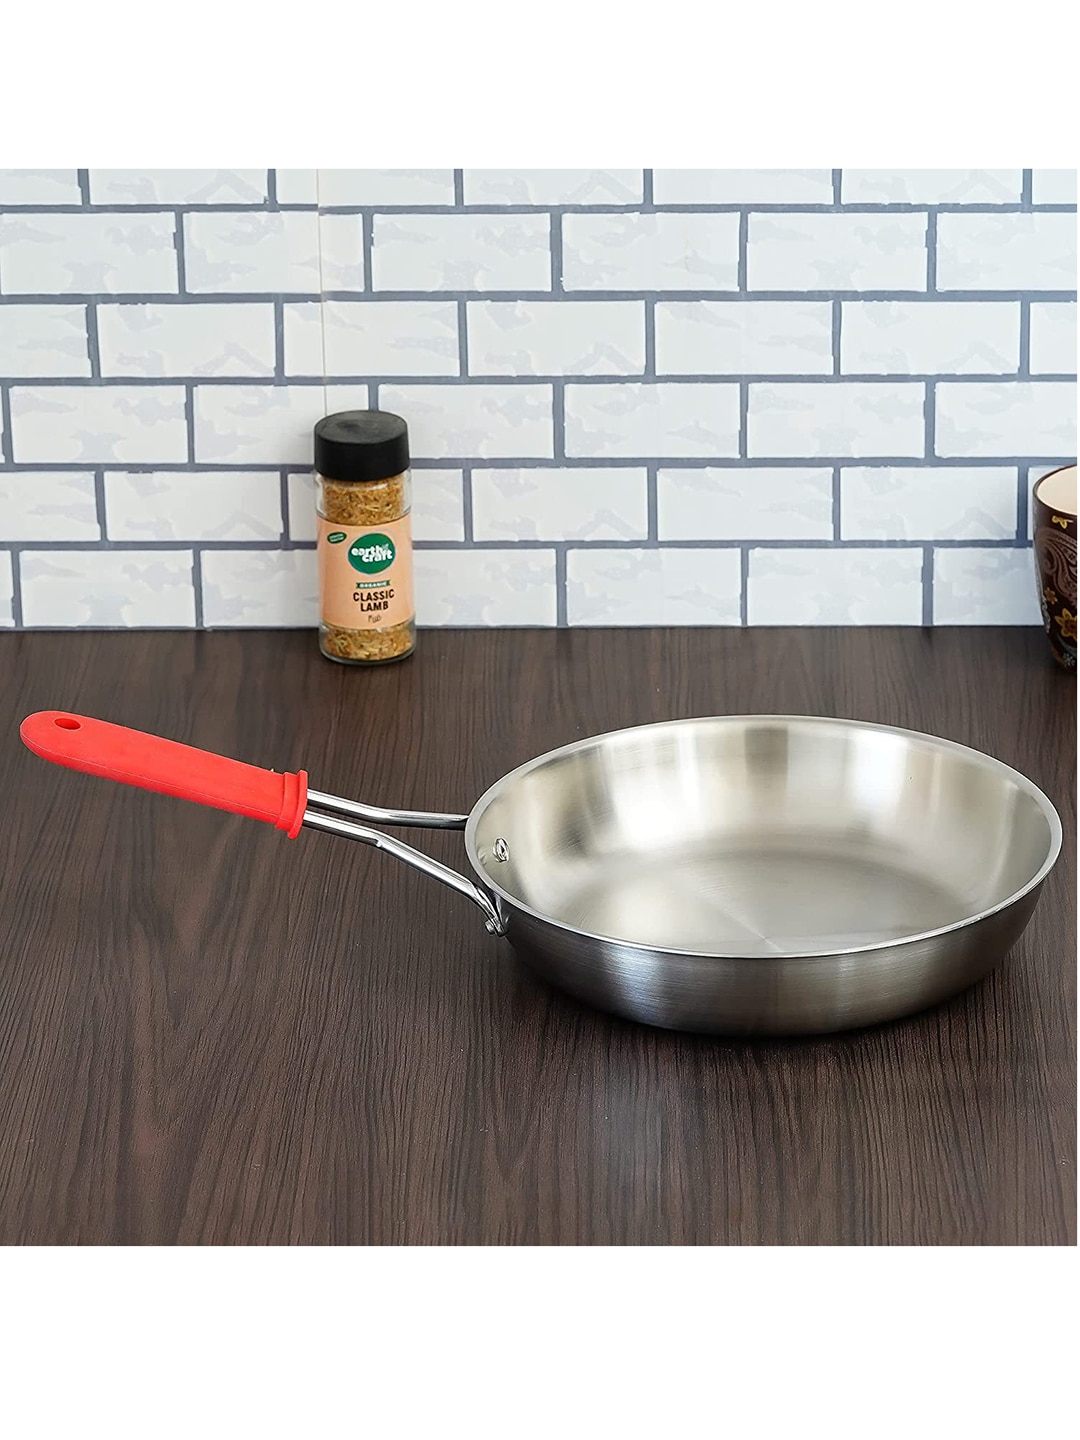 Femora Silver-Toned Frying Pan With Induction Base Price in India